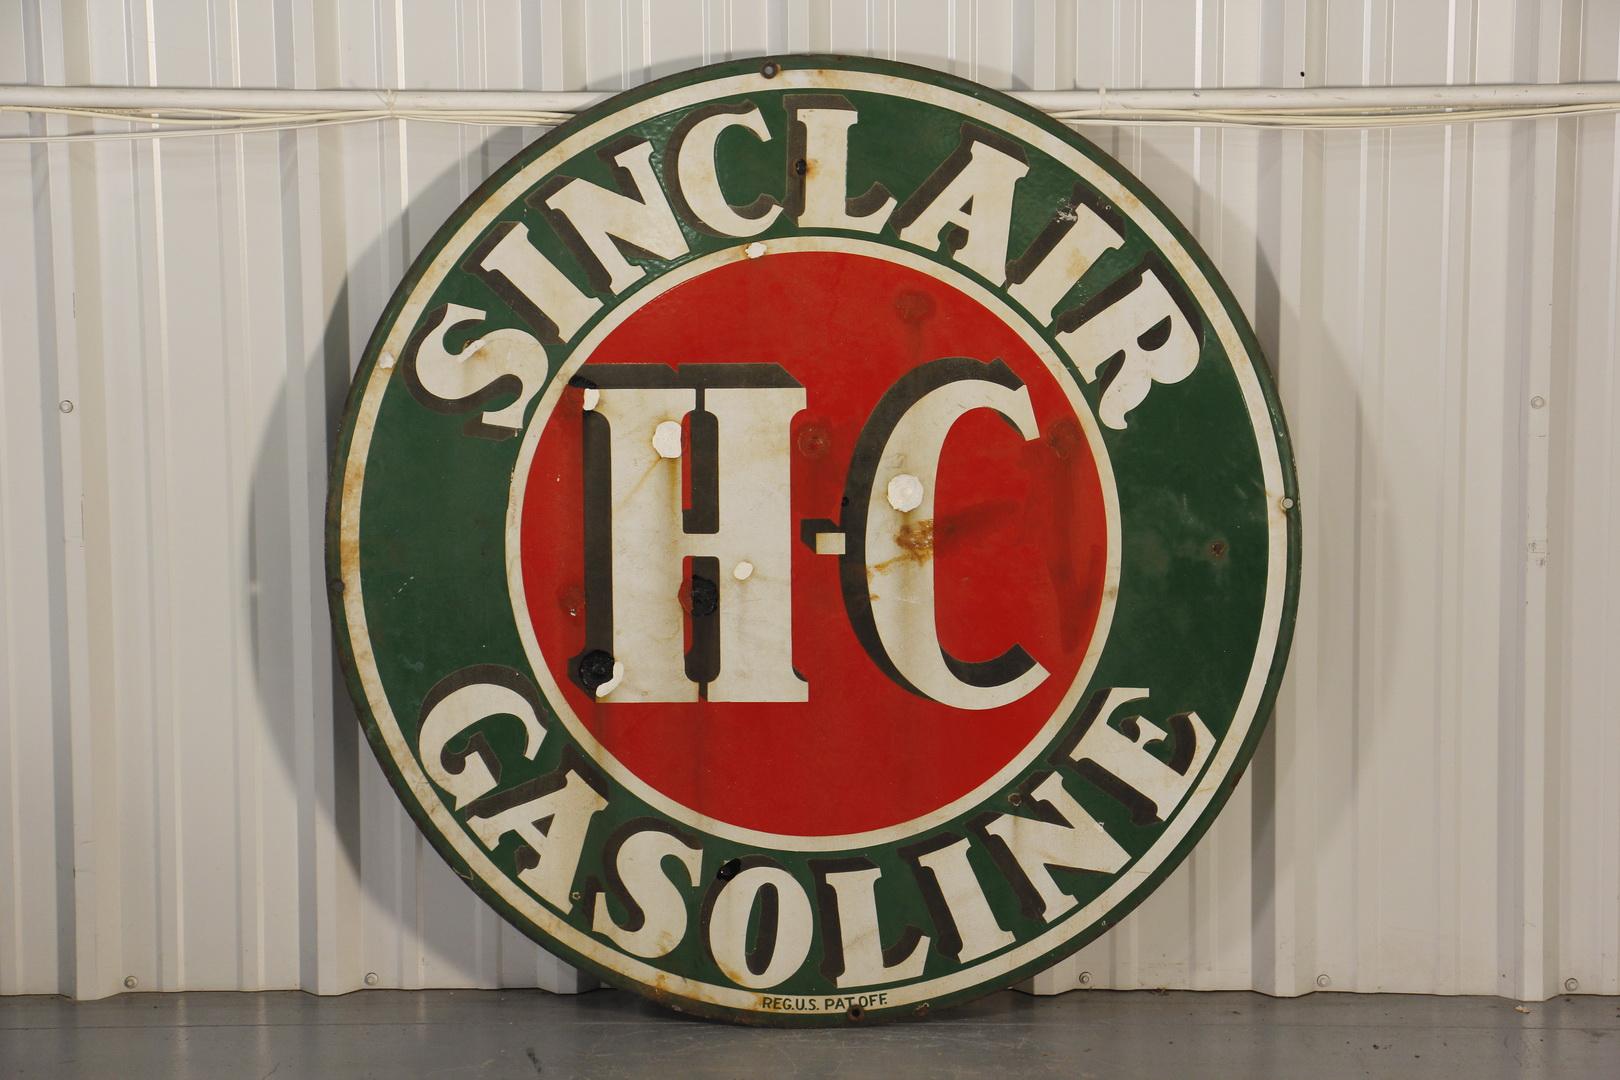 Sinclair H-C Gas Station Double-Sided Porcelain Sign - 48"